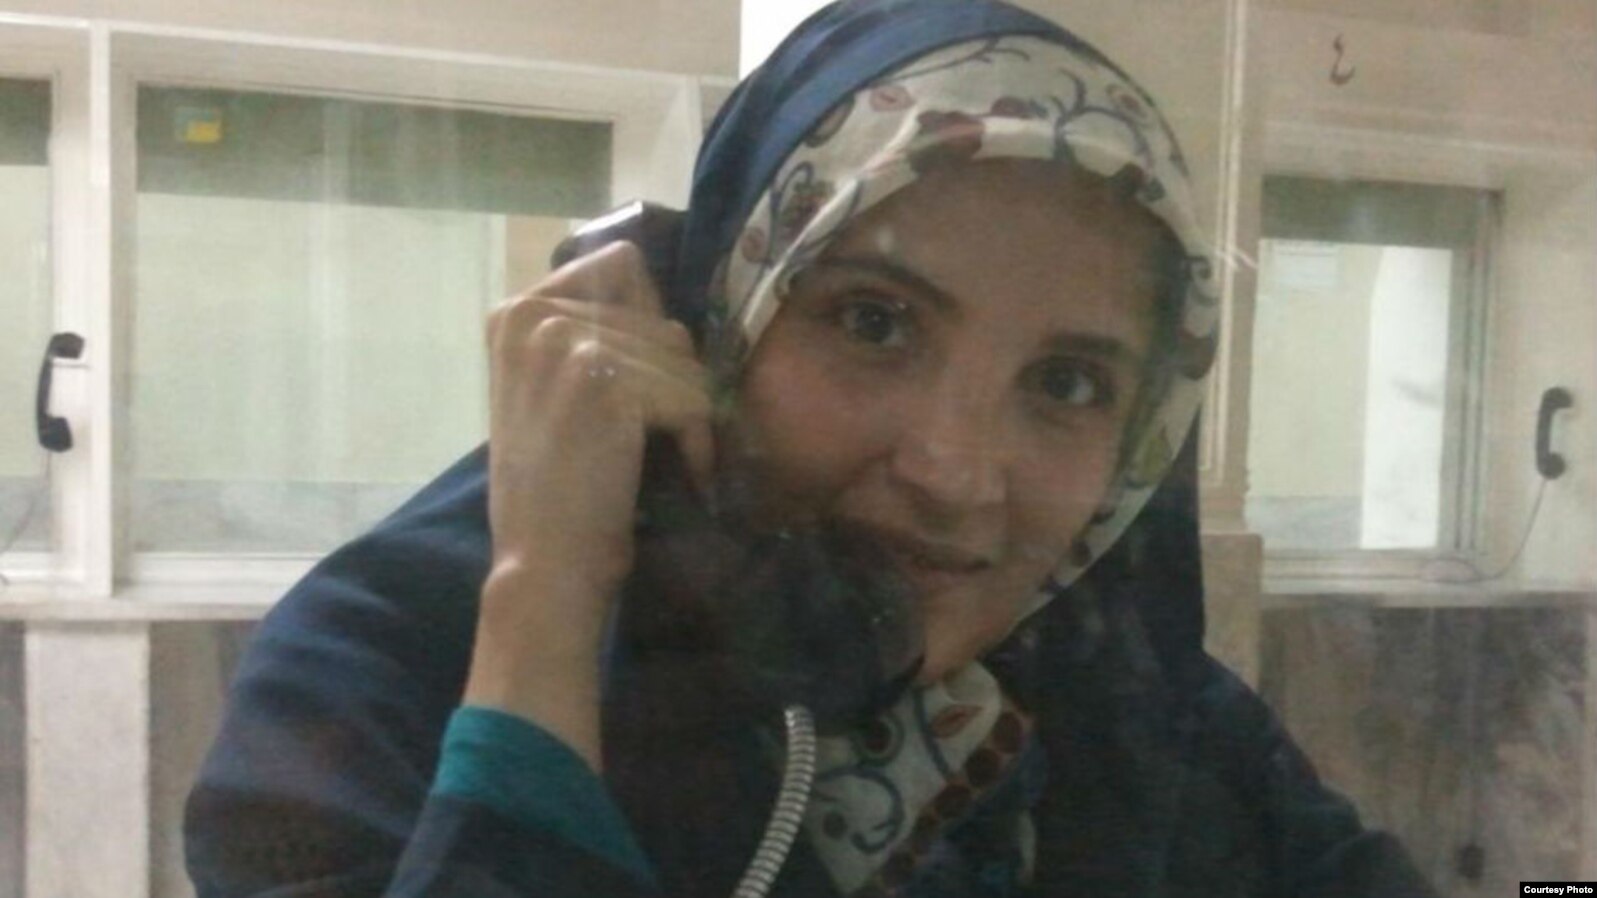 Hengameh Shahidi, Iranian journalist and activist, was arrested again on 9 March 2017